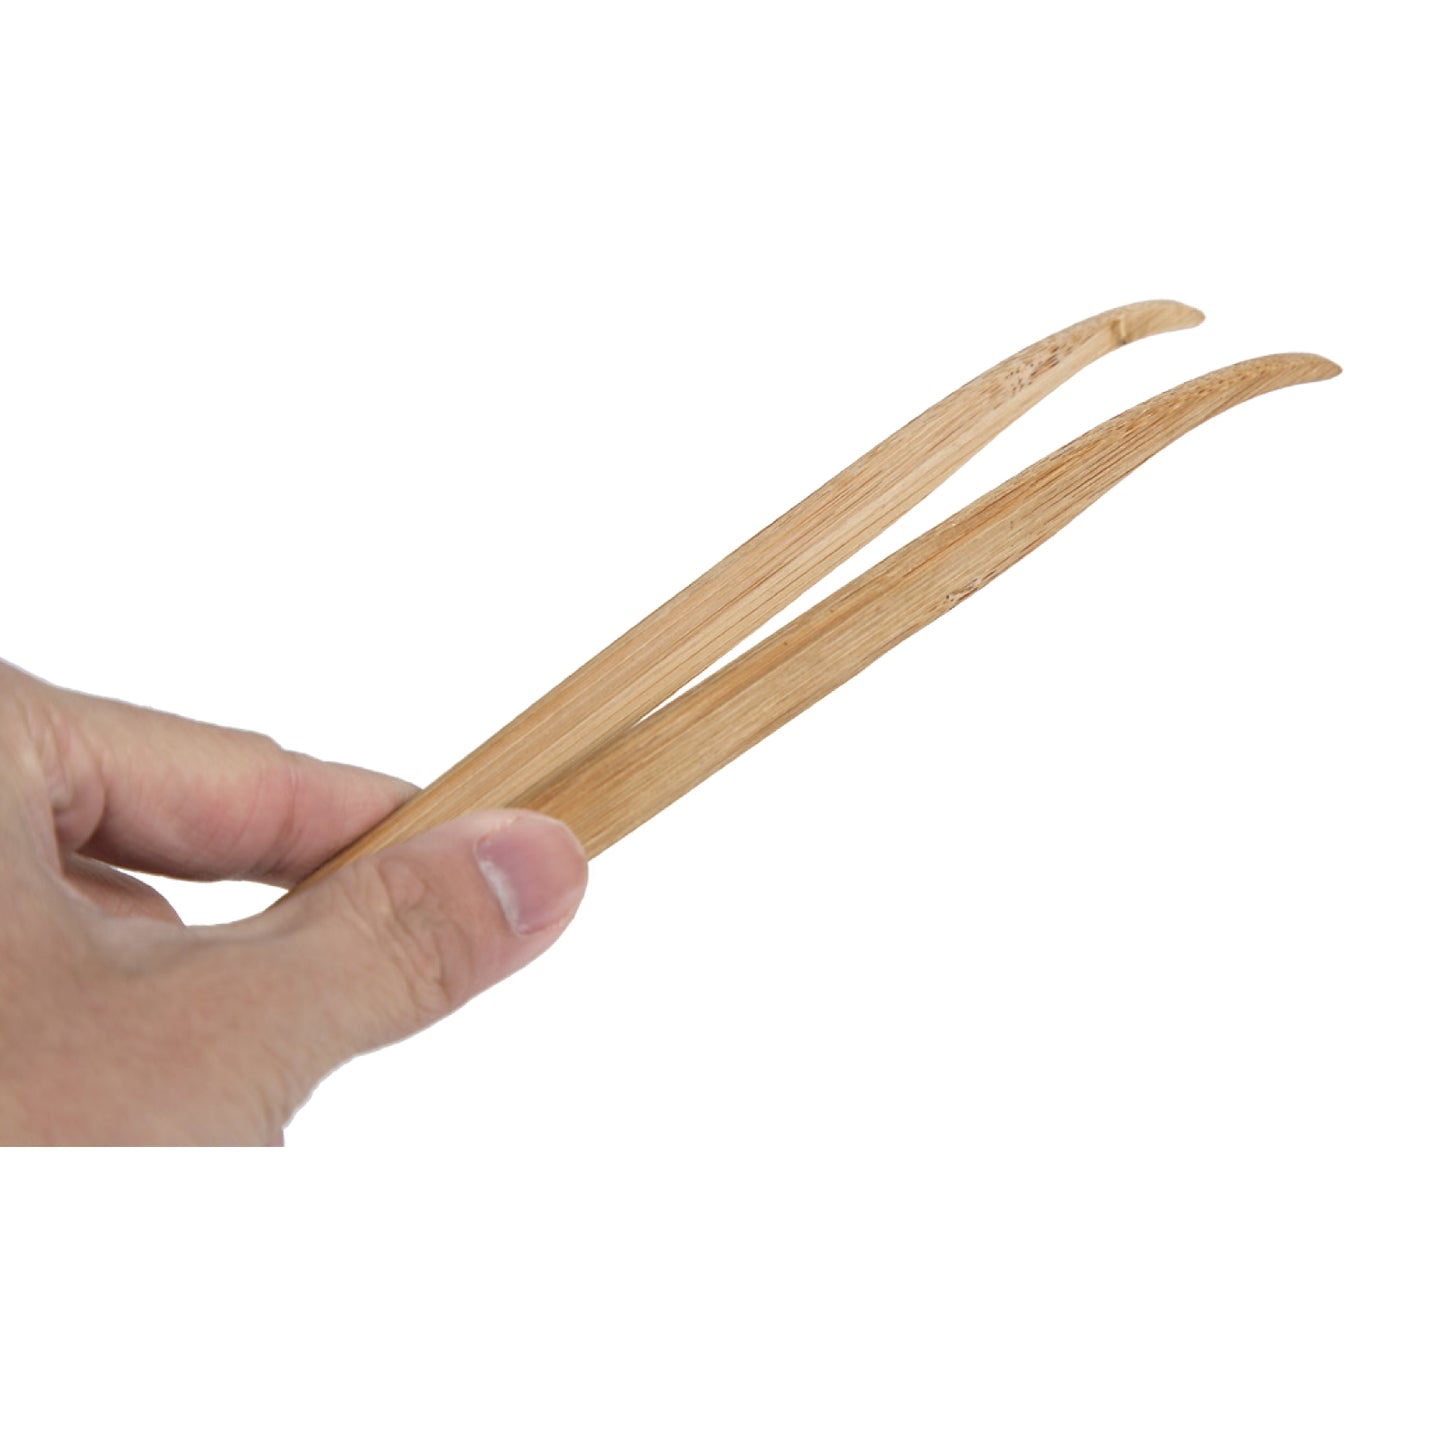 Livefood Stainless Bamboo Tweezers Curve 280mm (11")